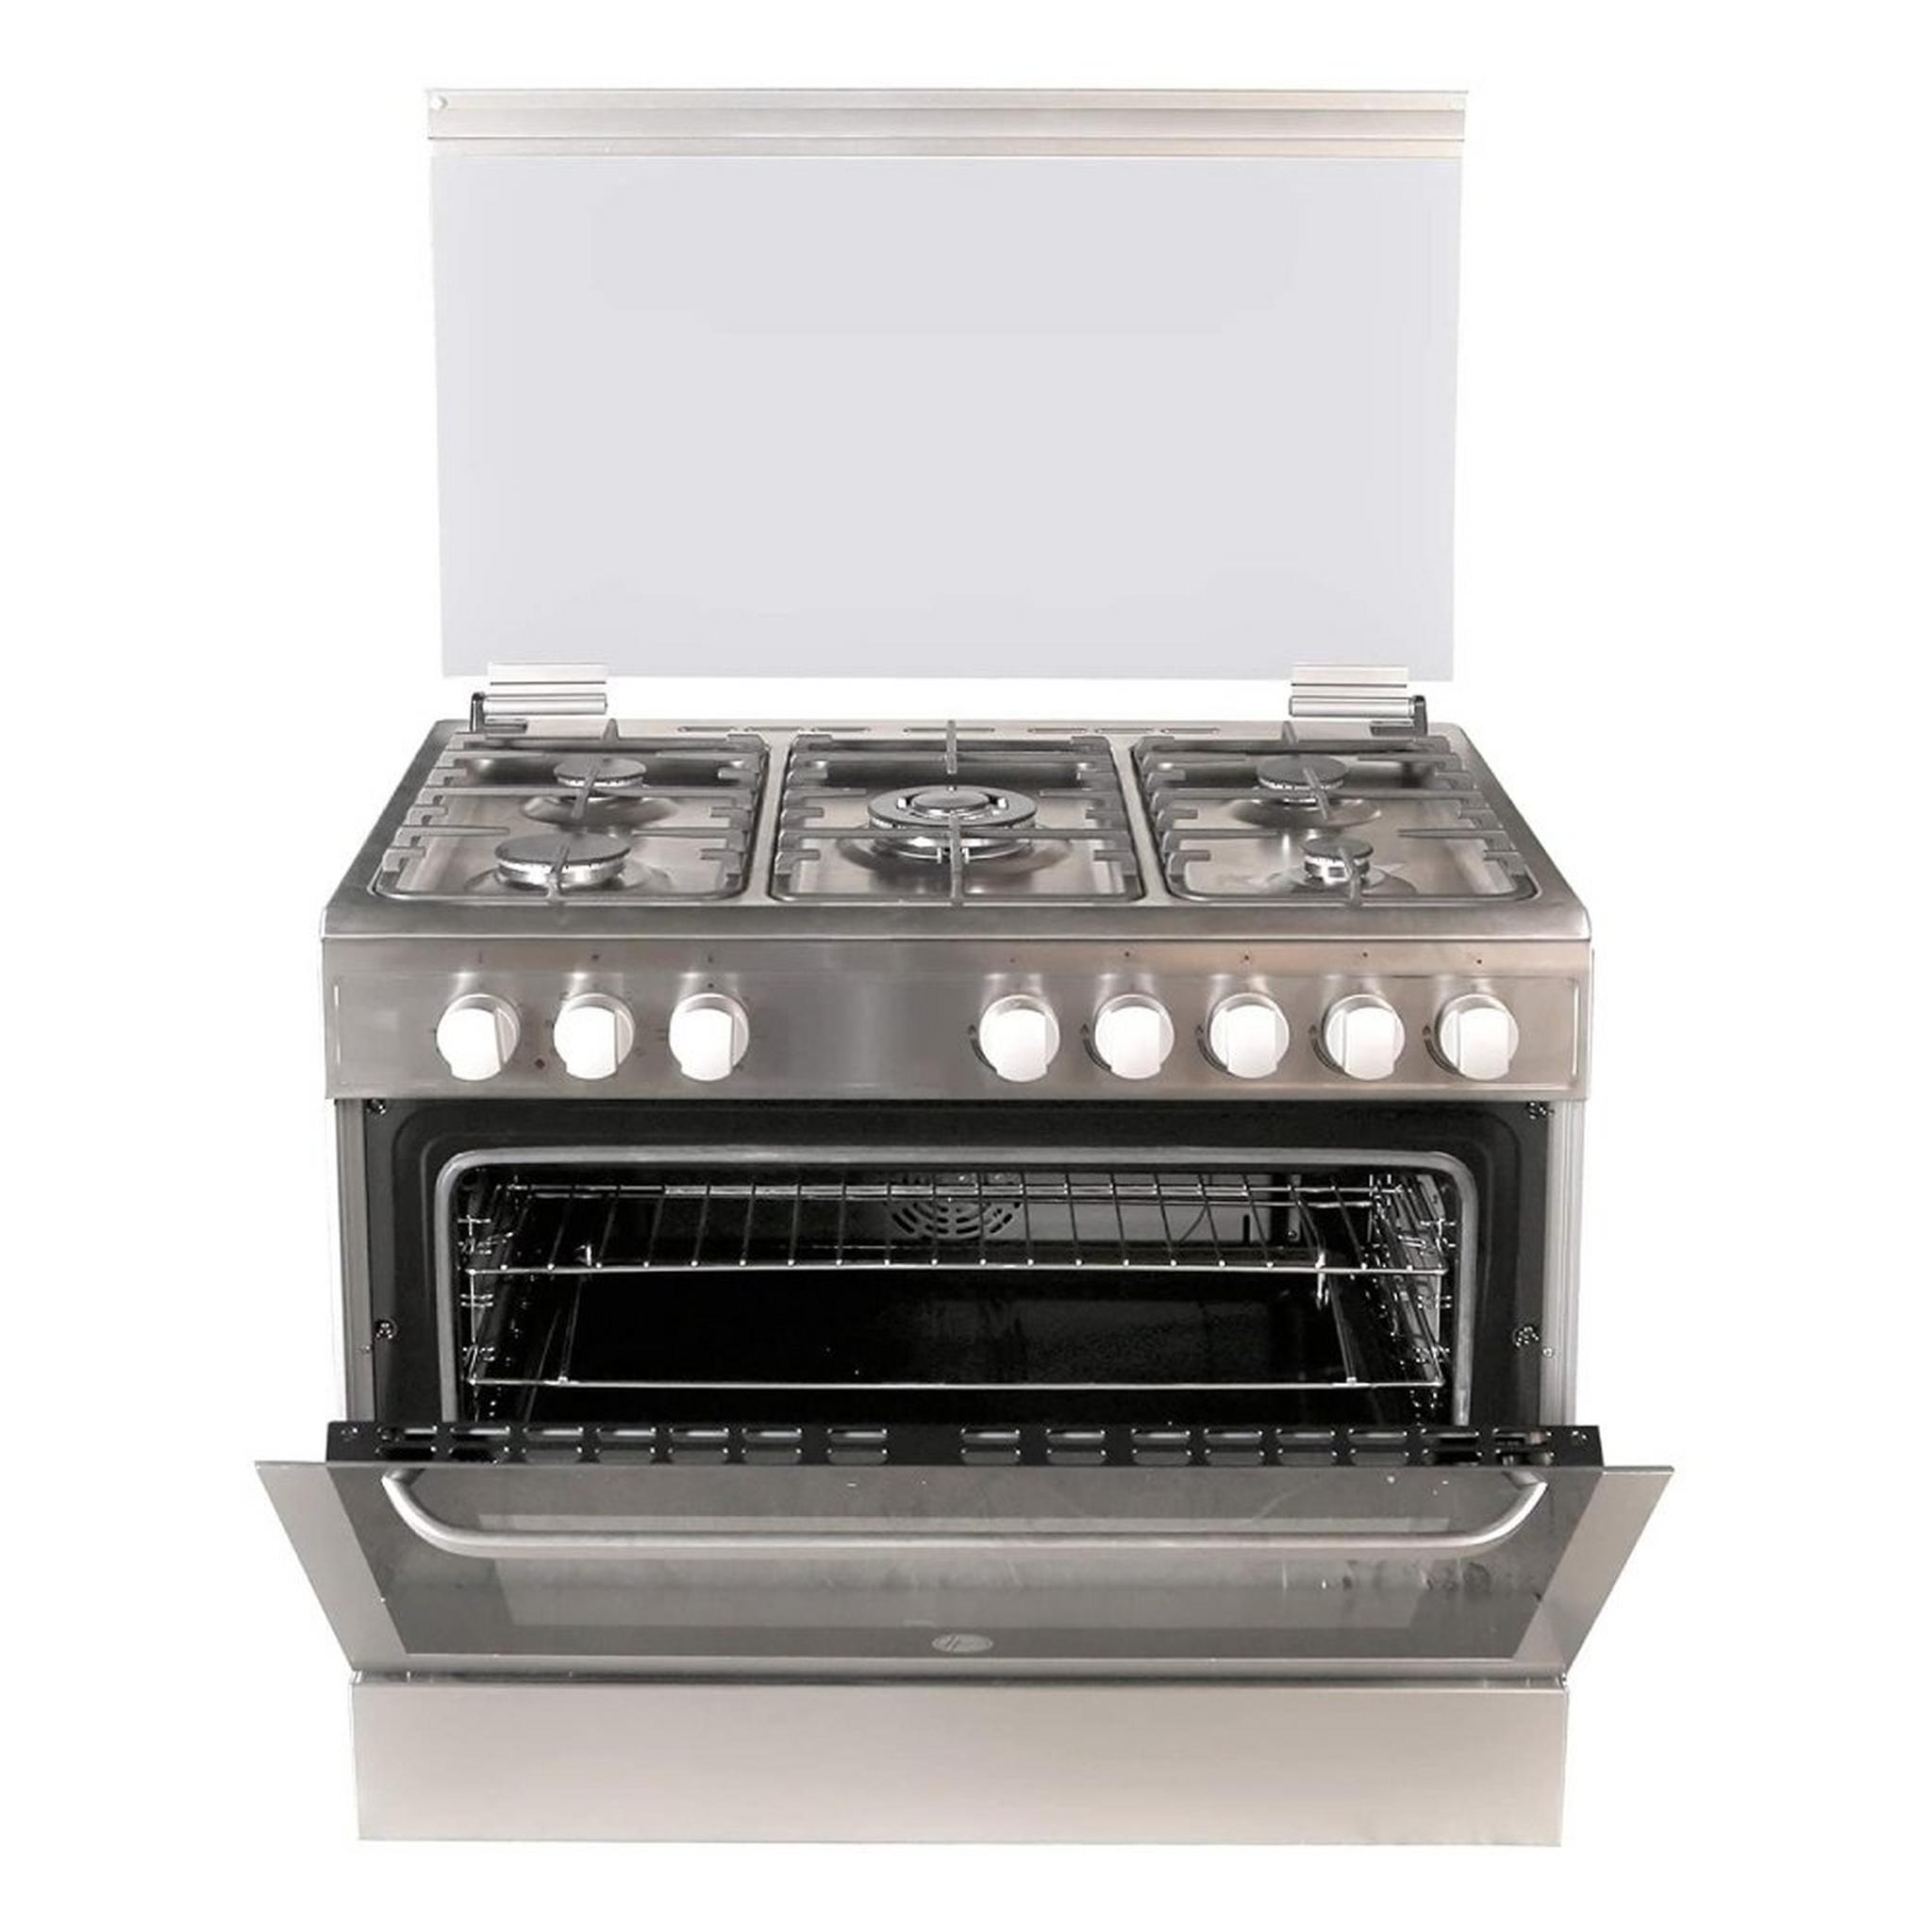 Hoover 90x60cm Gas Cooker - Stainless Steel (FGC9060-3D)